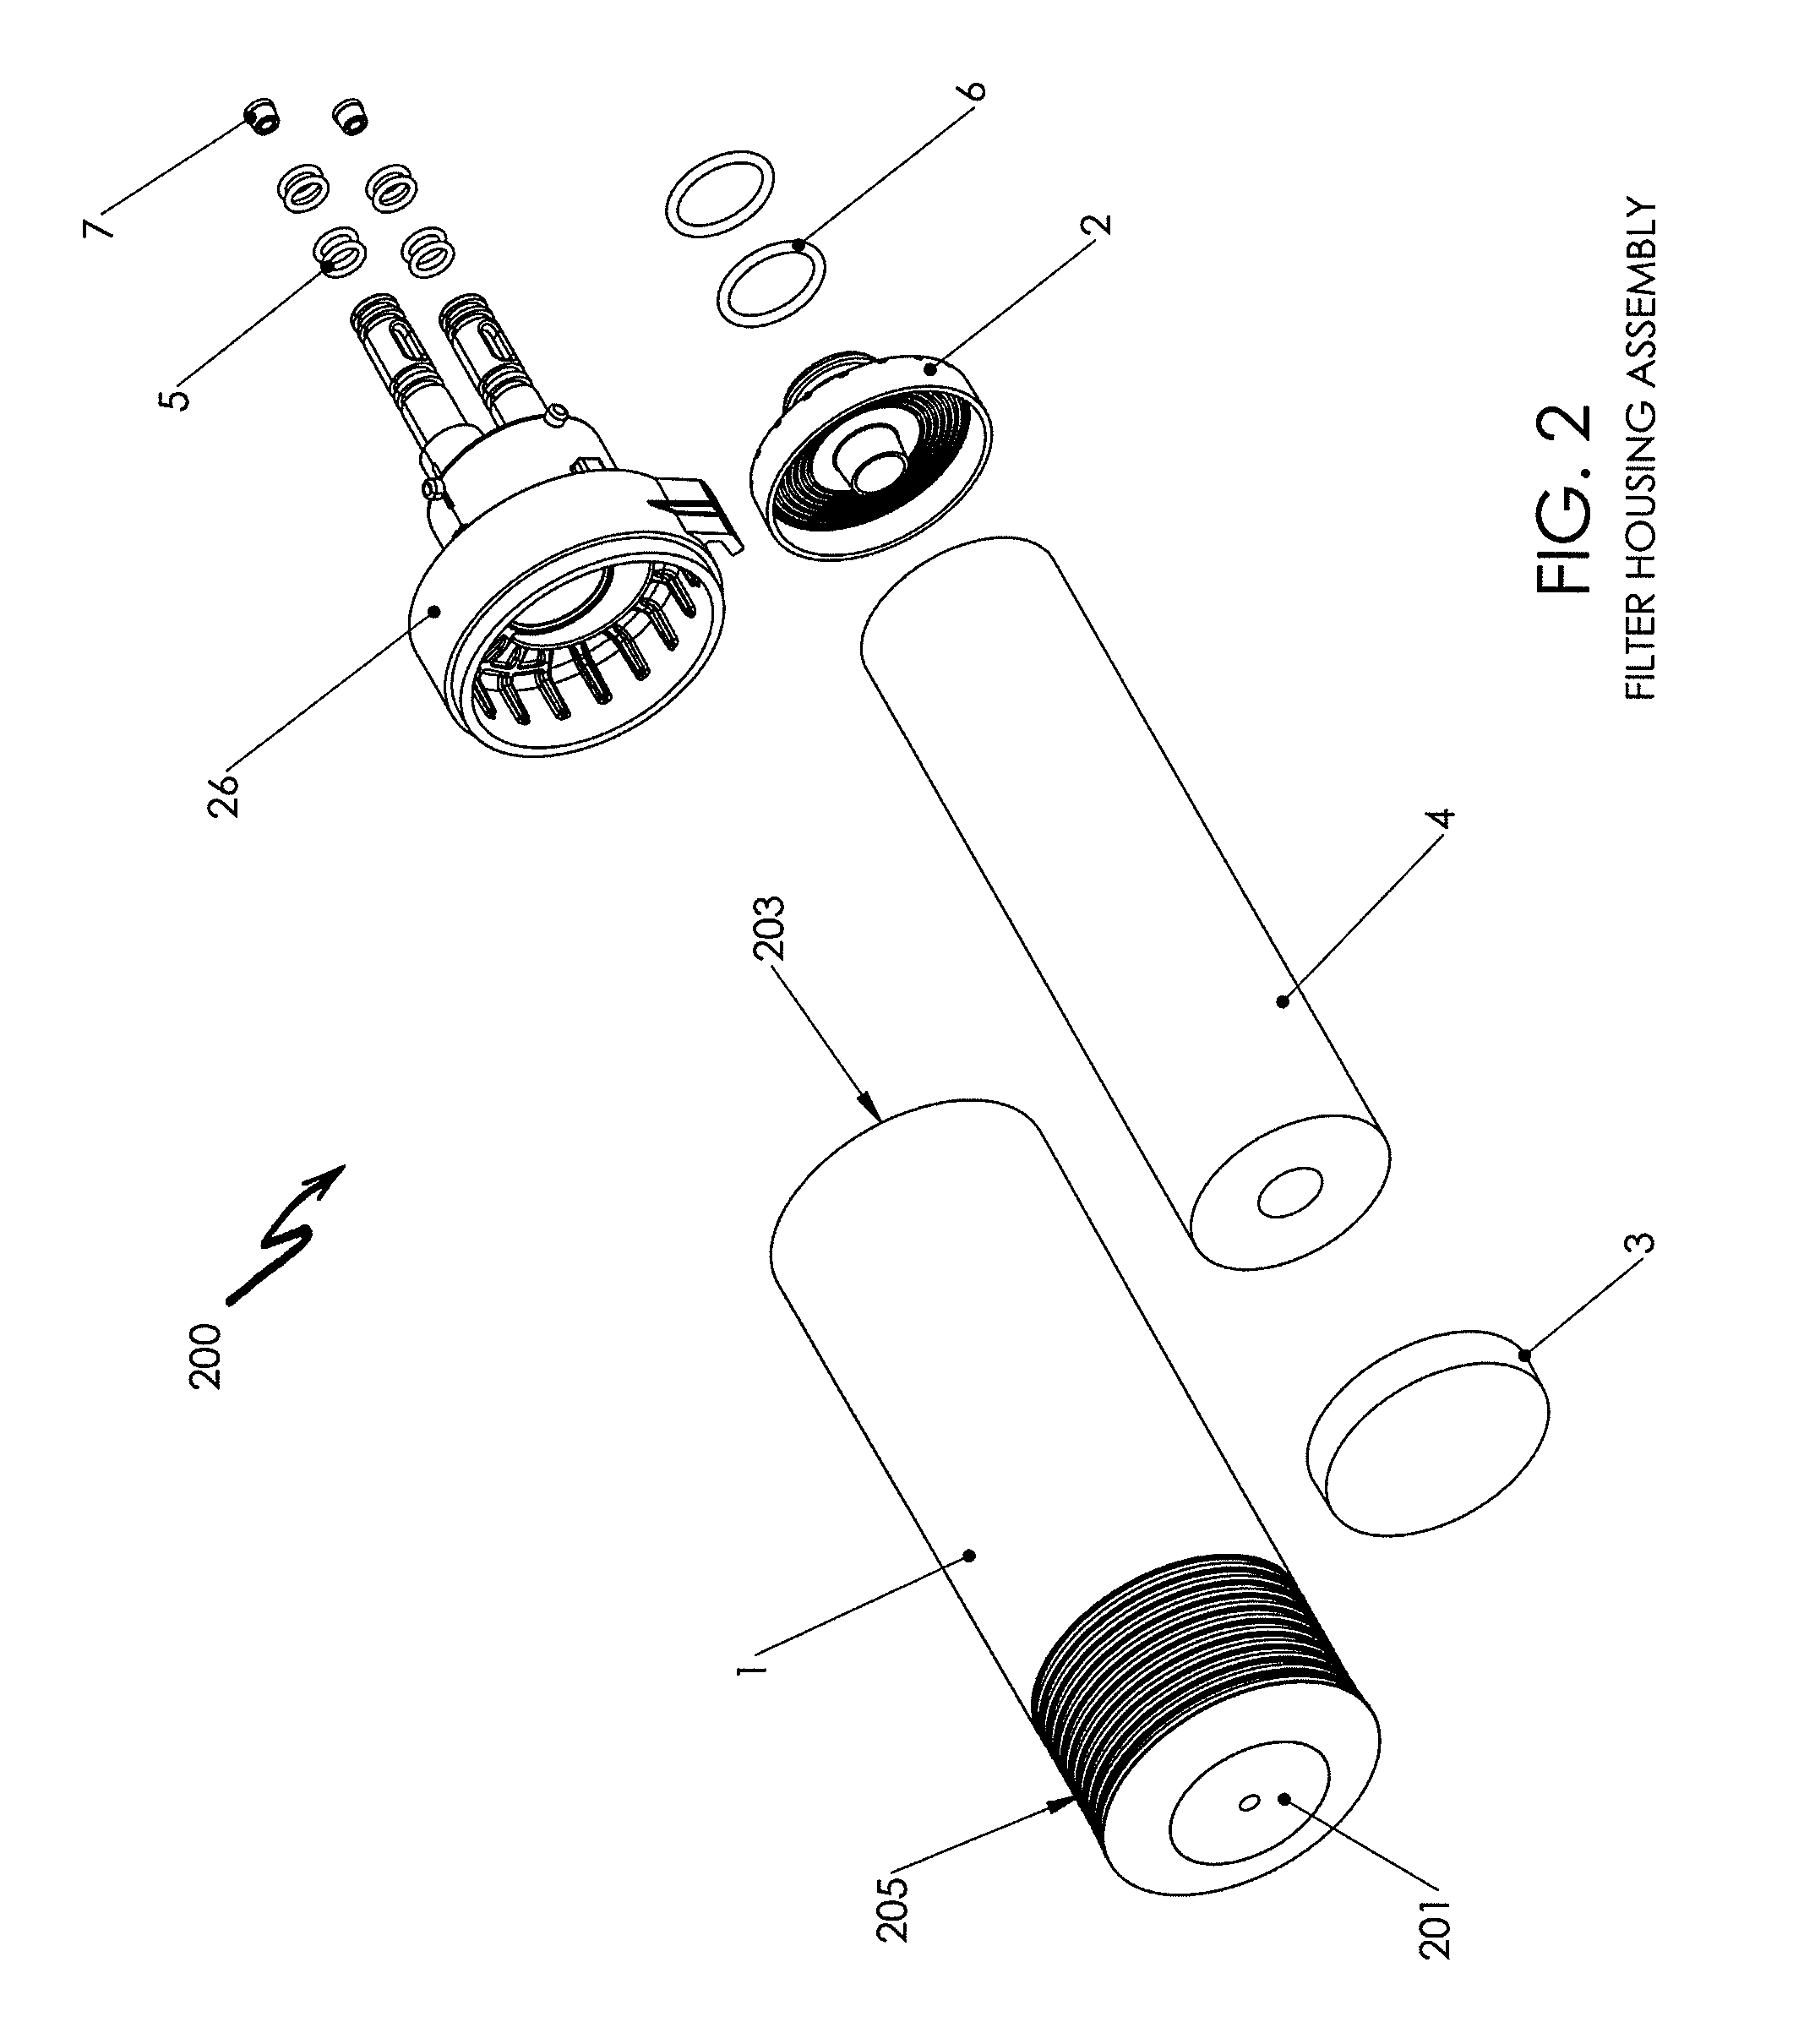 Filter housing apparatus with rotating filter replacement mechanism